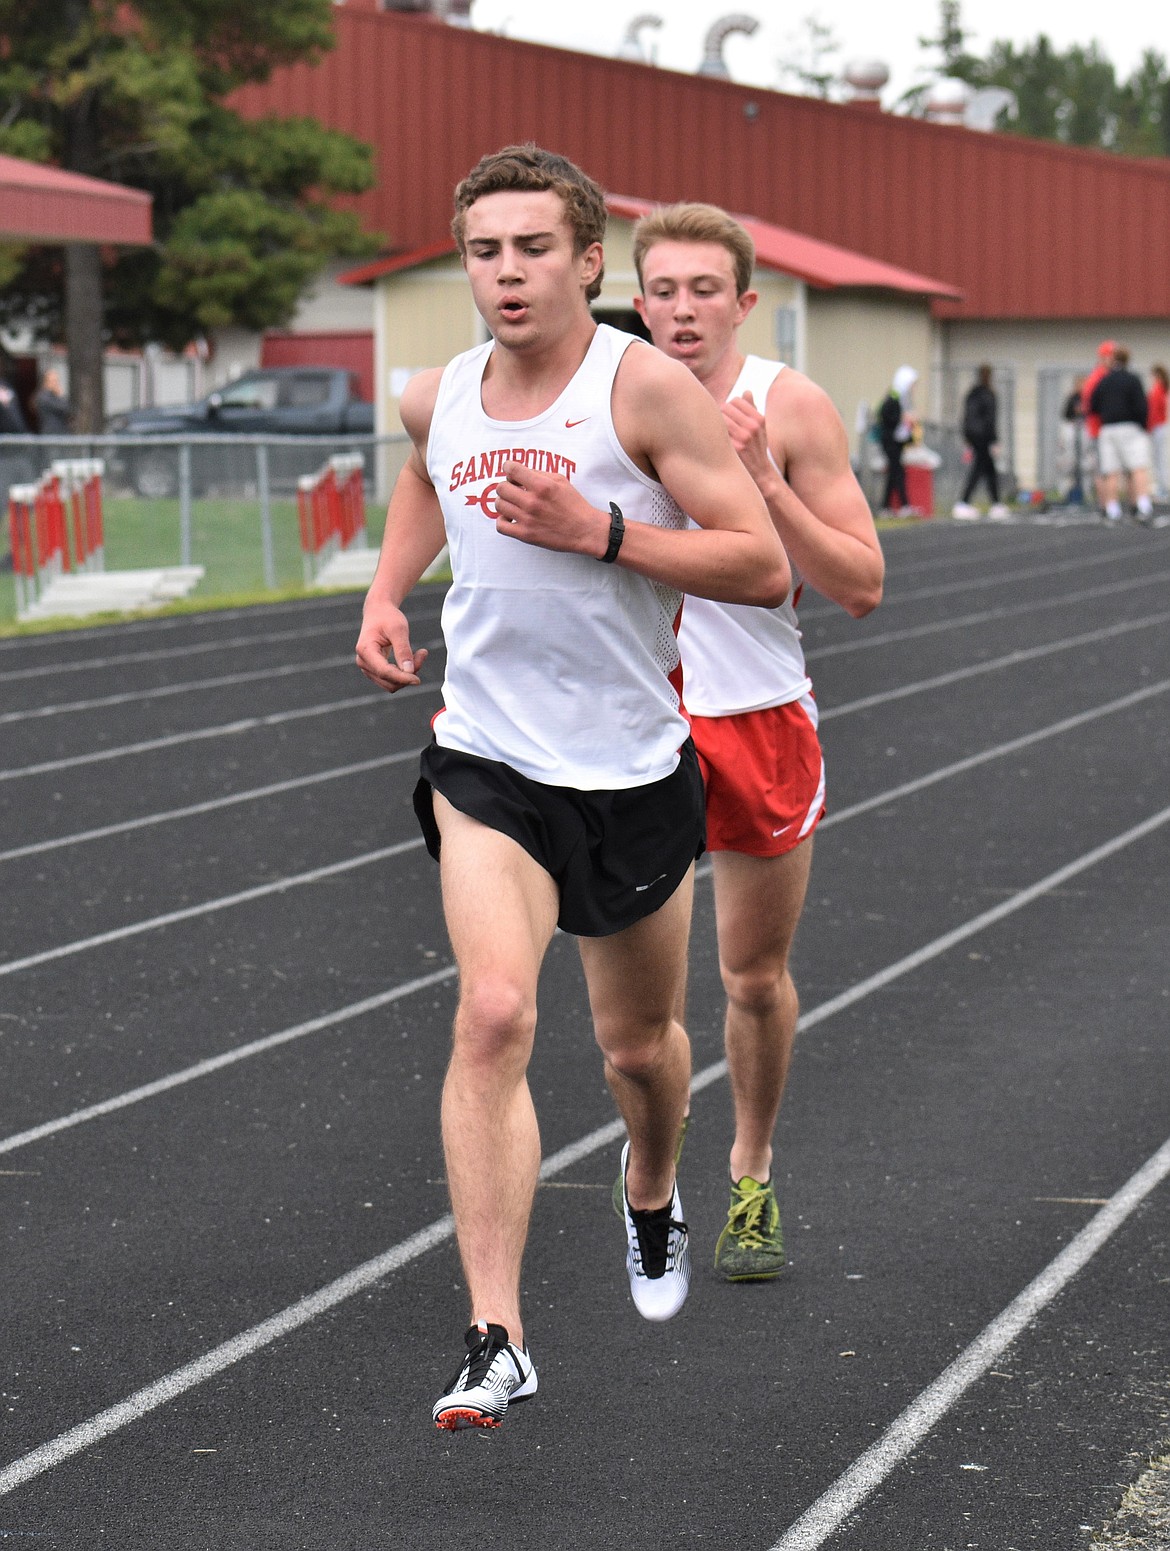 Brady Nelsen competes in the 3200 at the Sandpoint Open on June 13, 2020. Nelsen just wrapped up a successful freshman season for the Lewis-Clark State College cross country team.